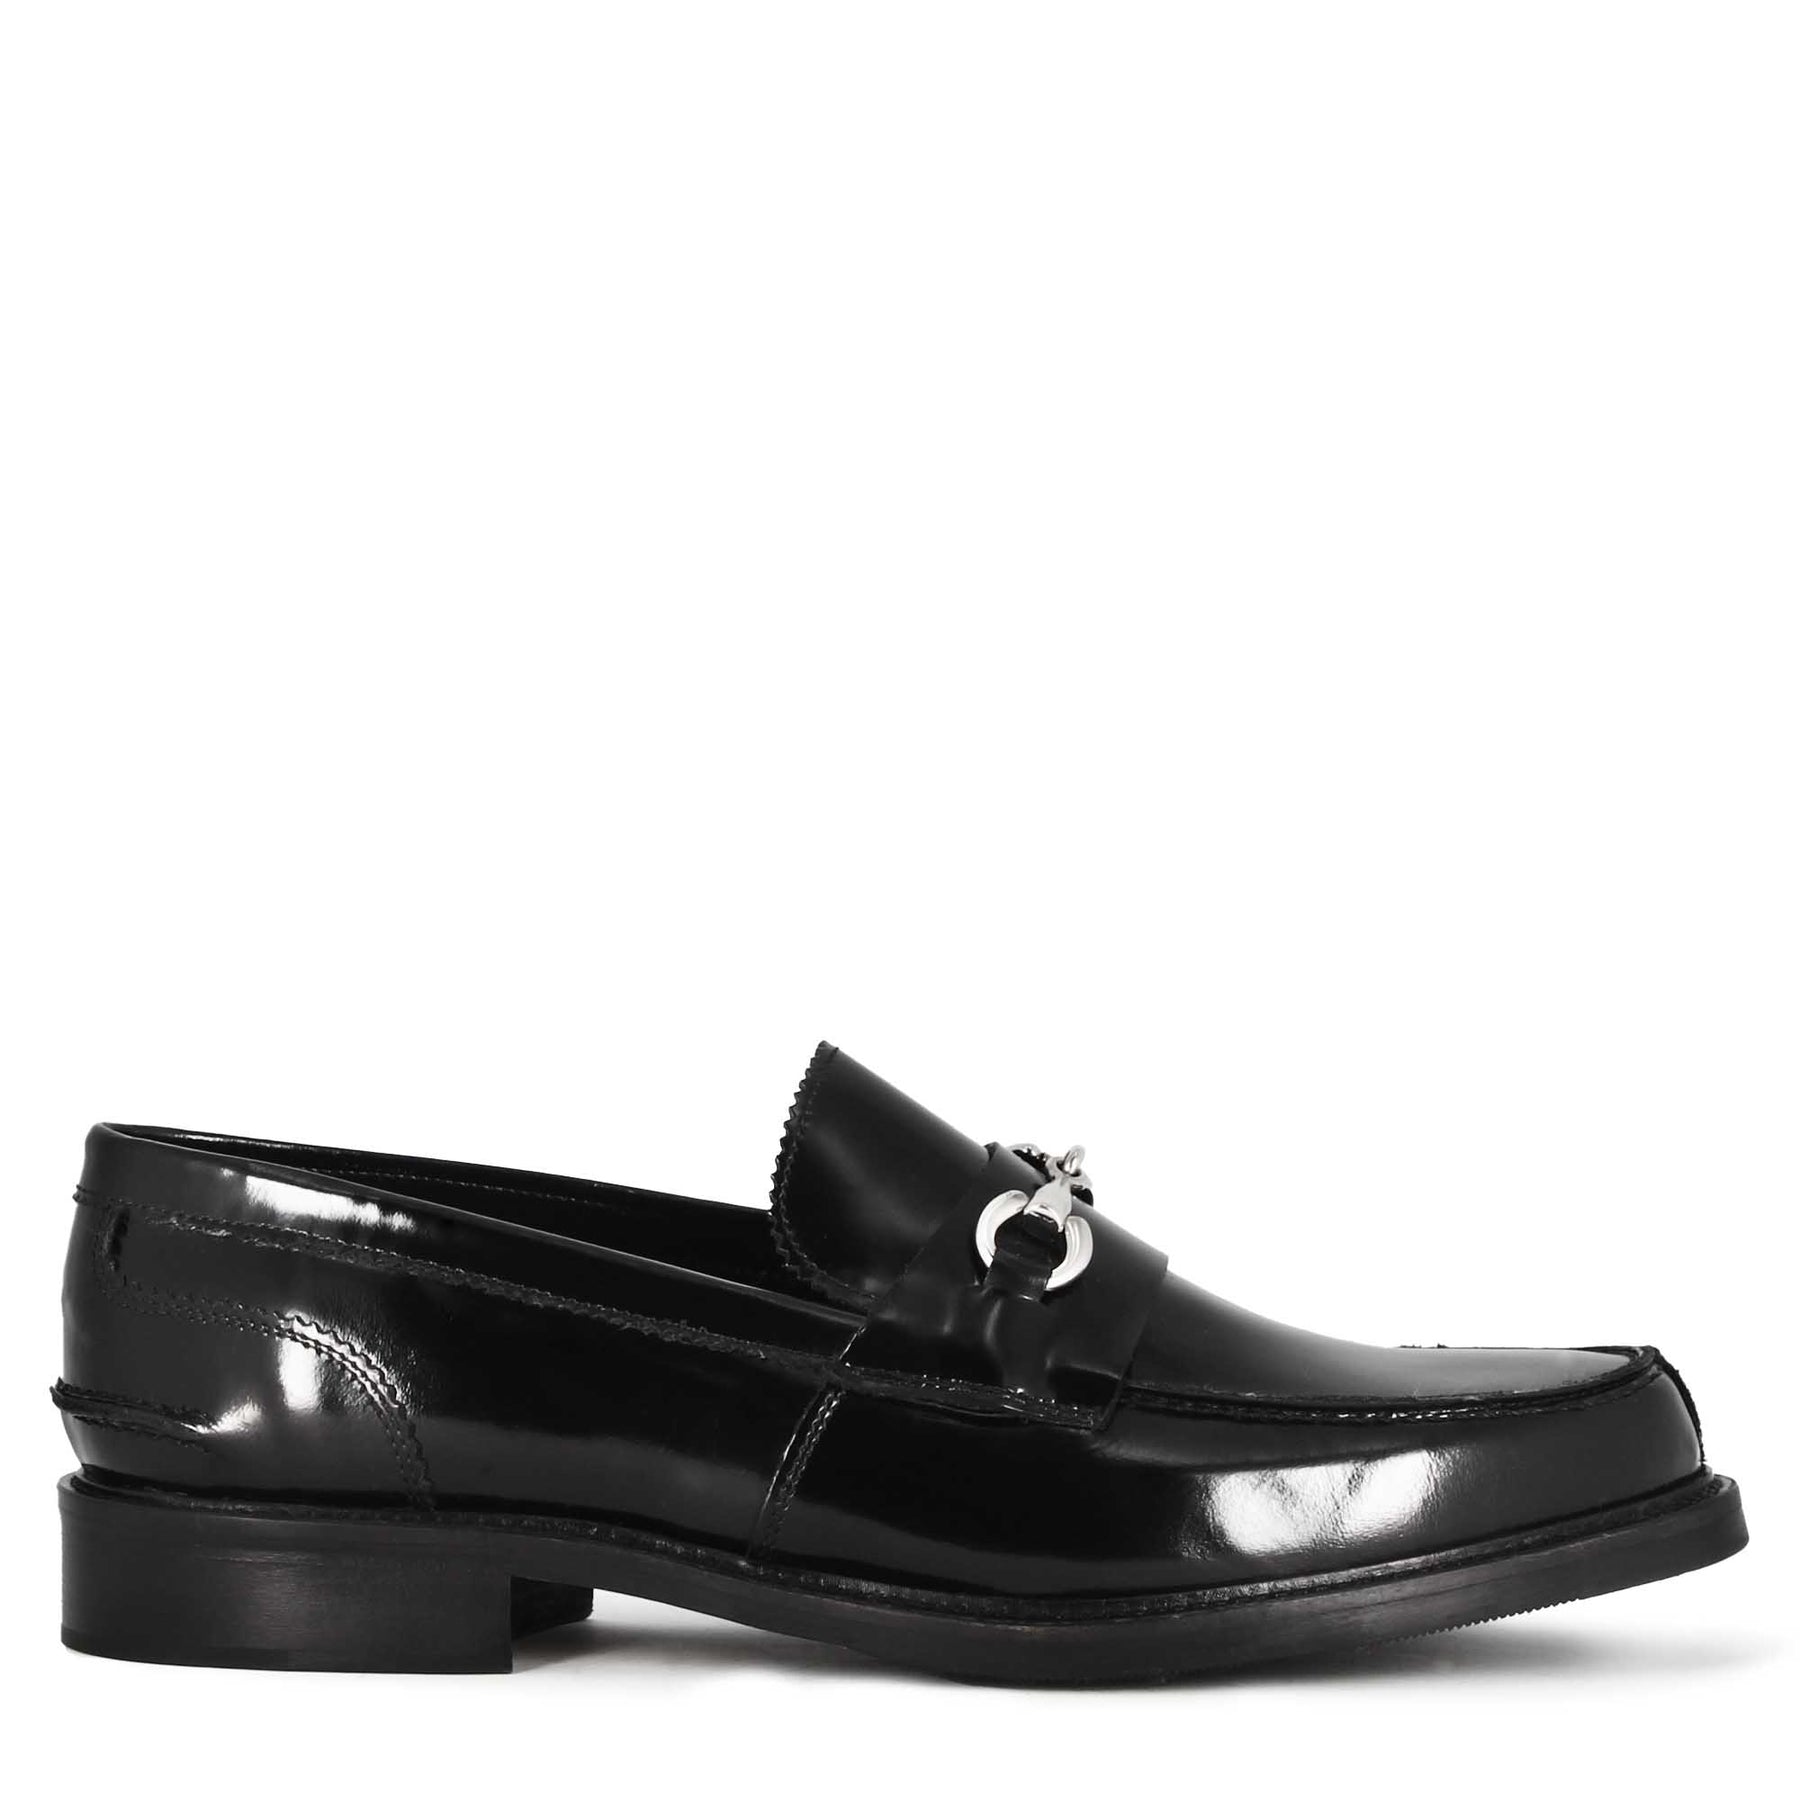 Men's moccasin with clamp in shiny black leather